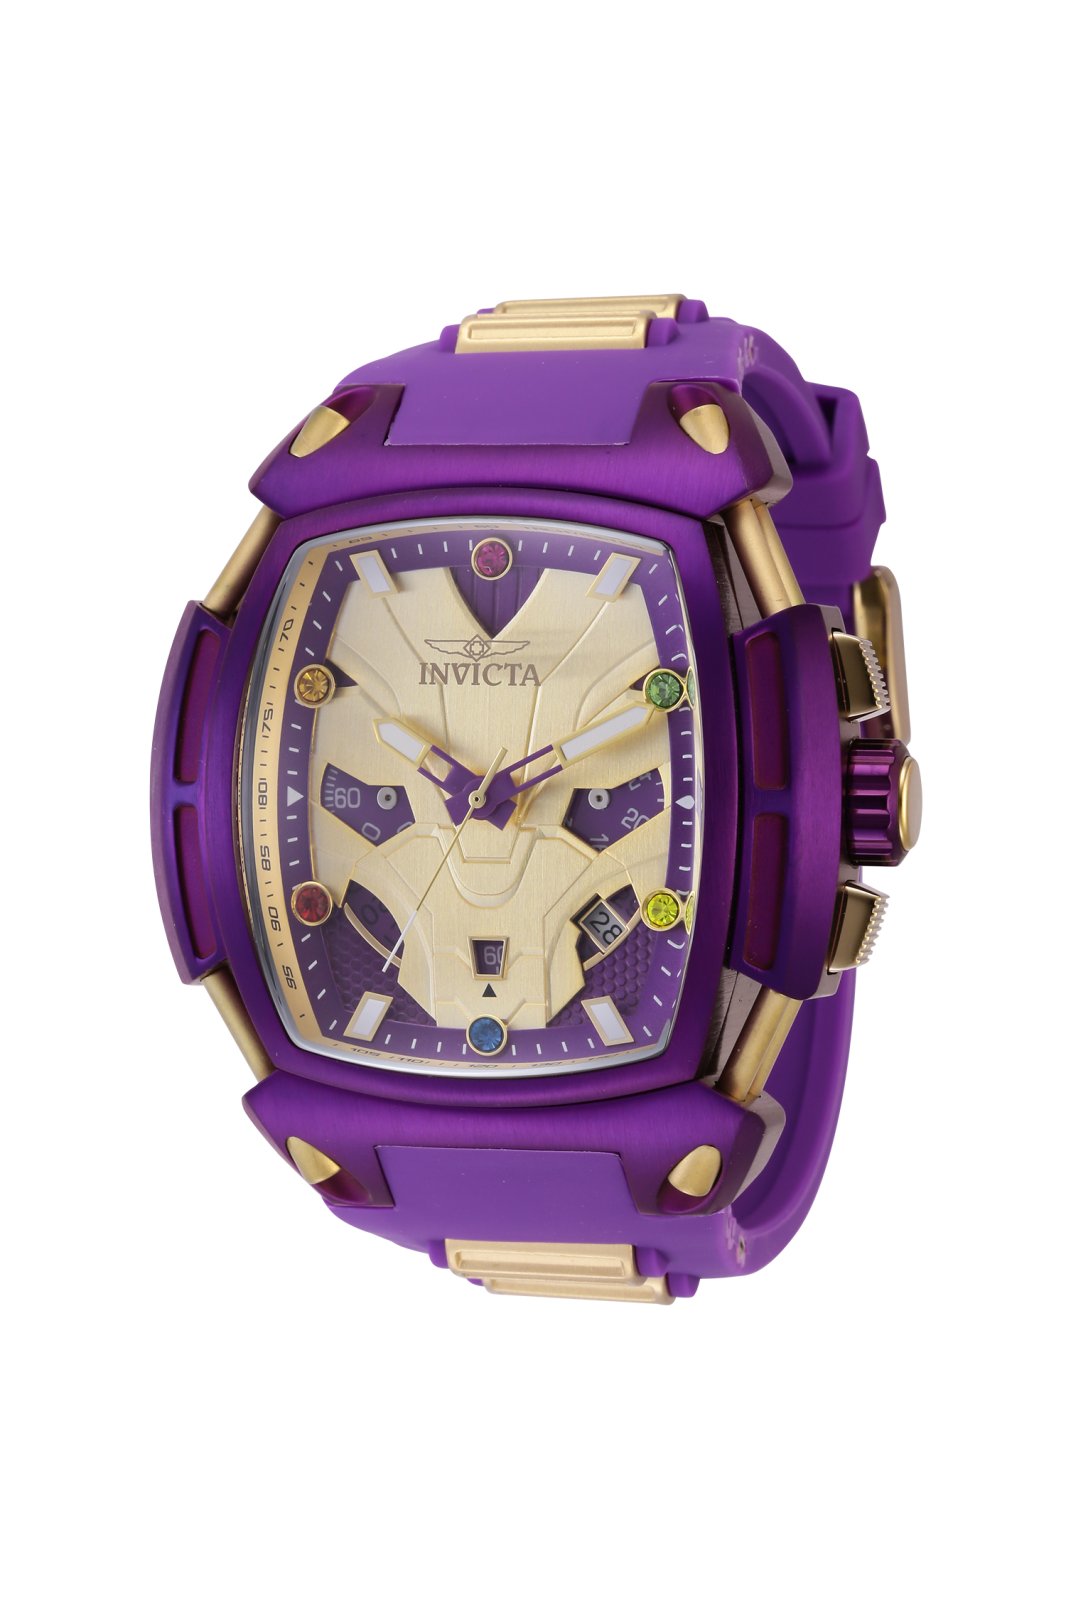 Invicta Watch Marvel - Thanos 43163 - Official Invicta Store - Buy Online!